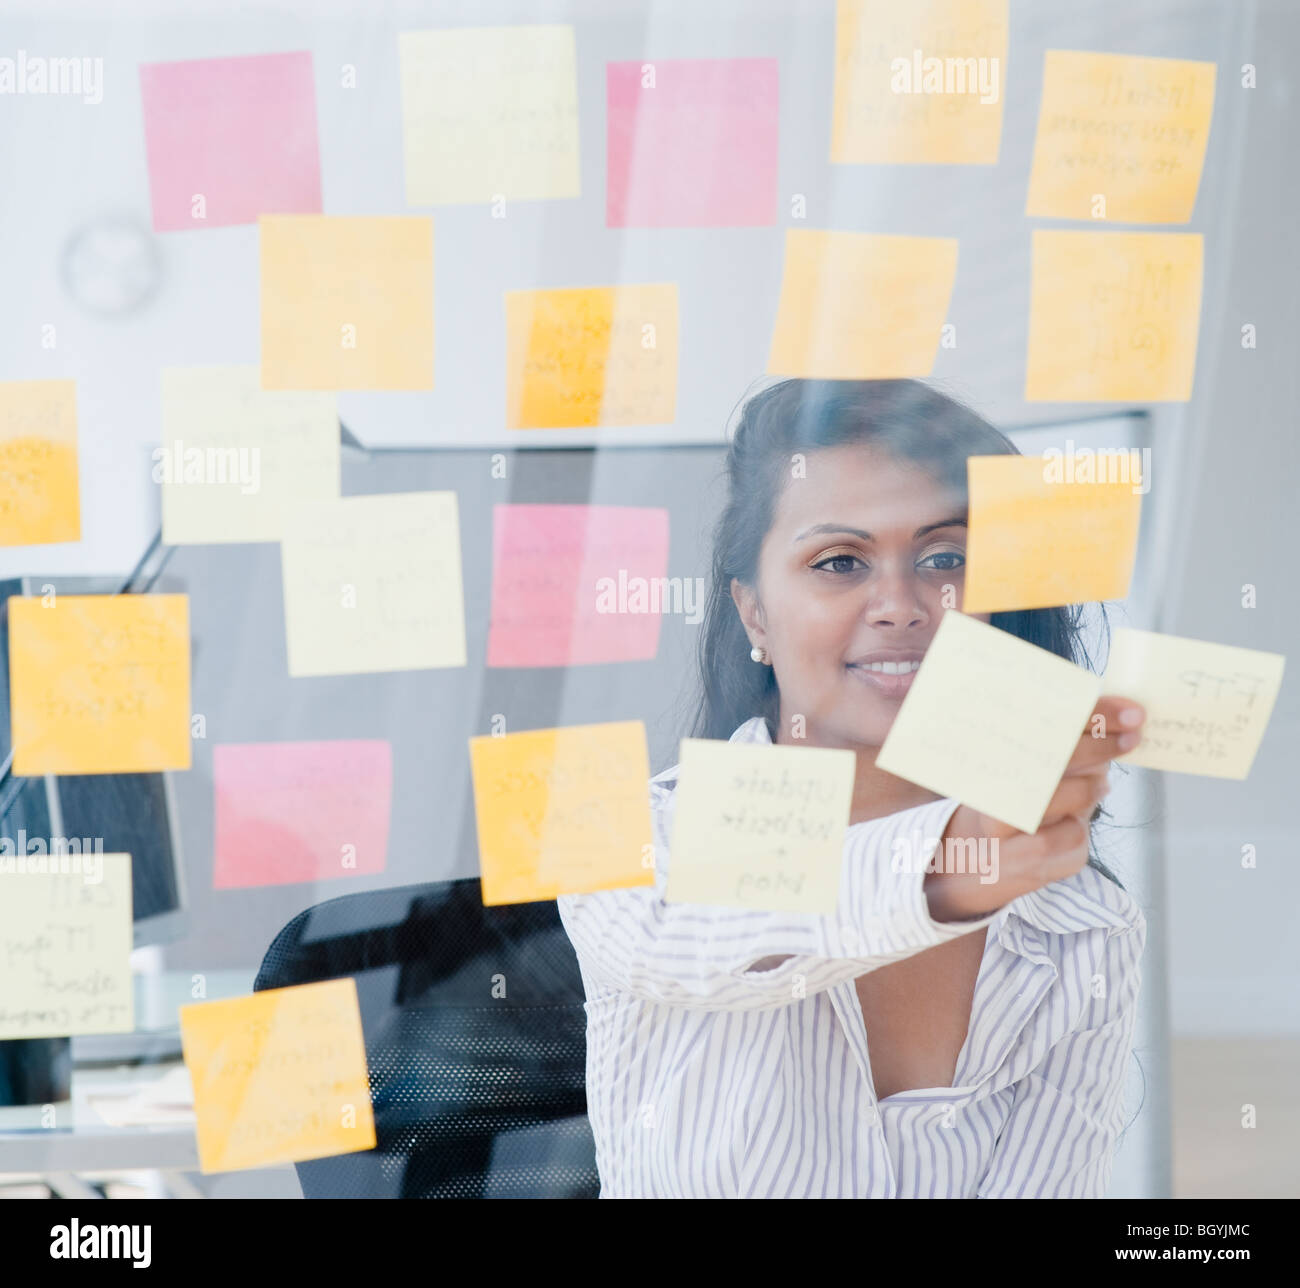 Woman looking at post-it notes Stock Photo